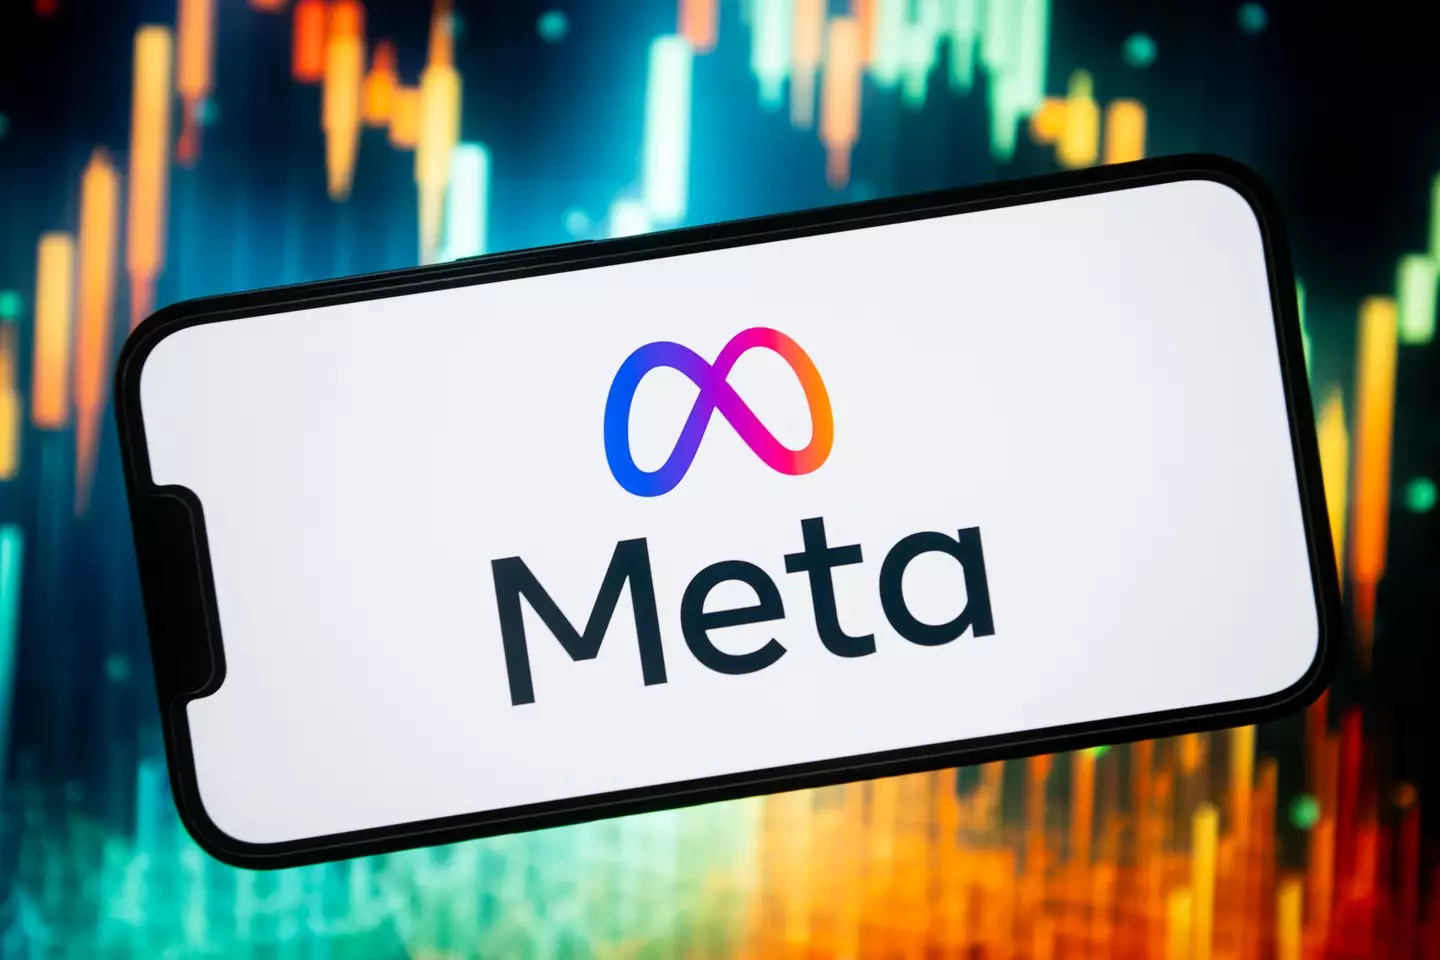 Meta has released a statement.